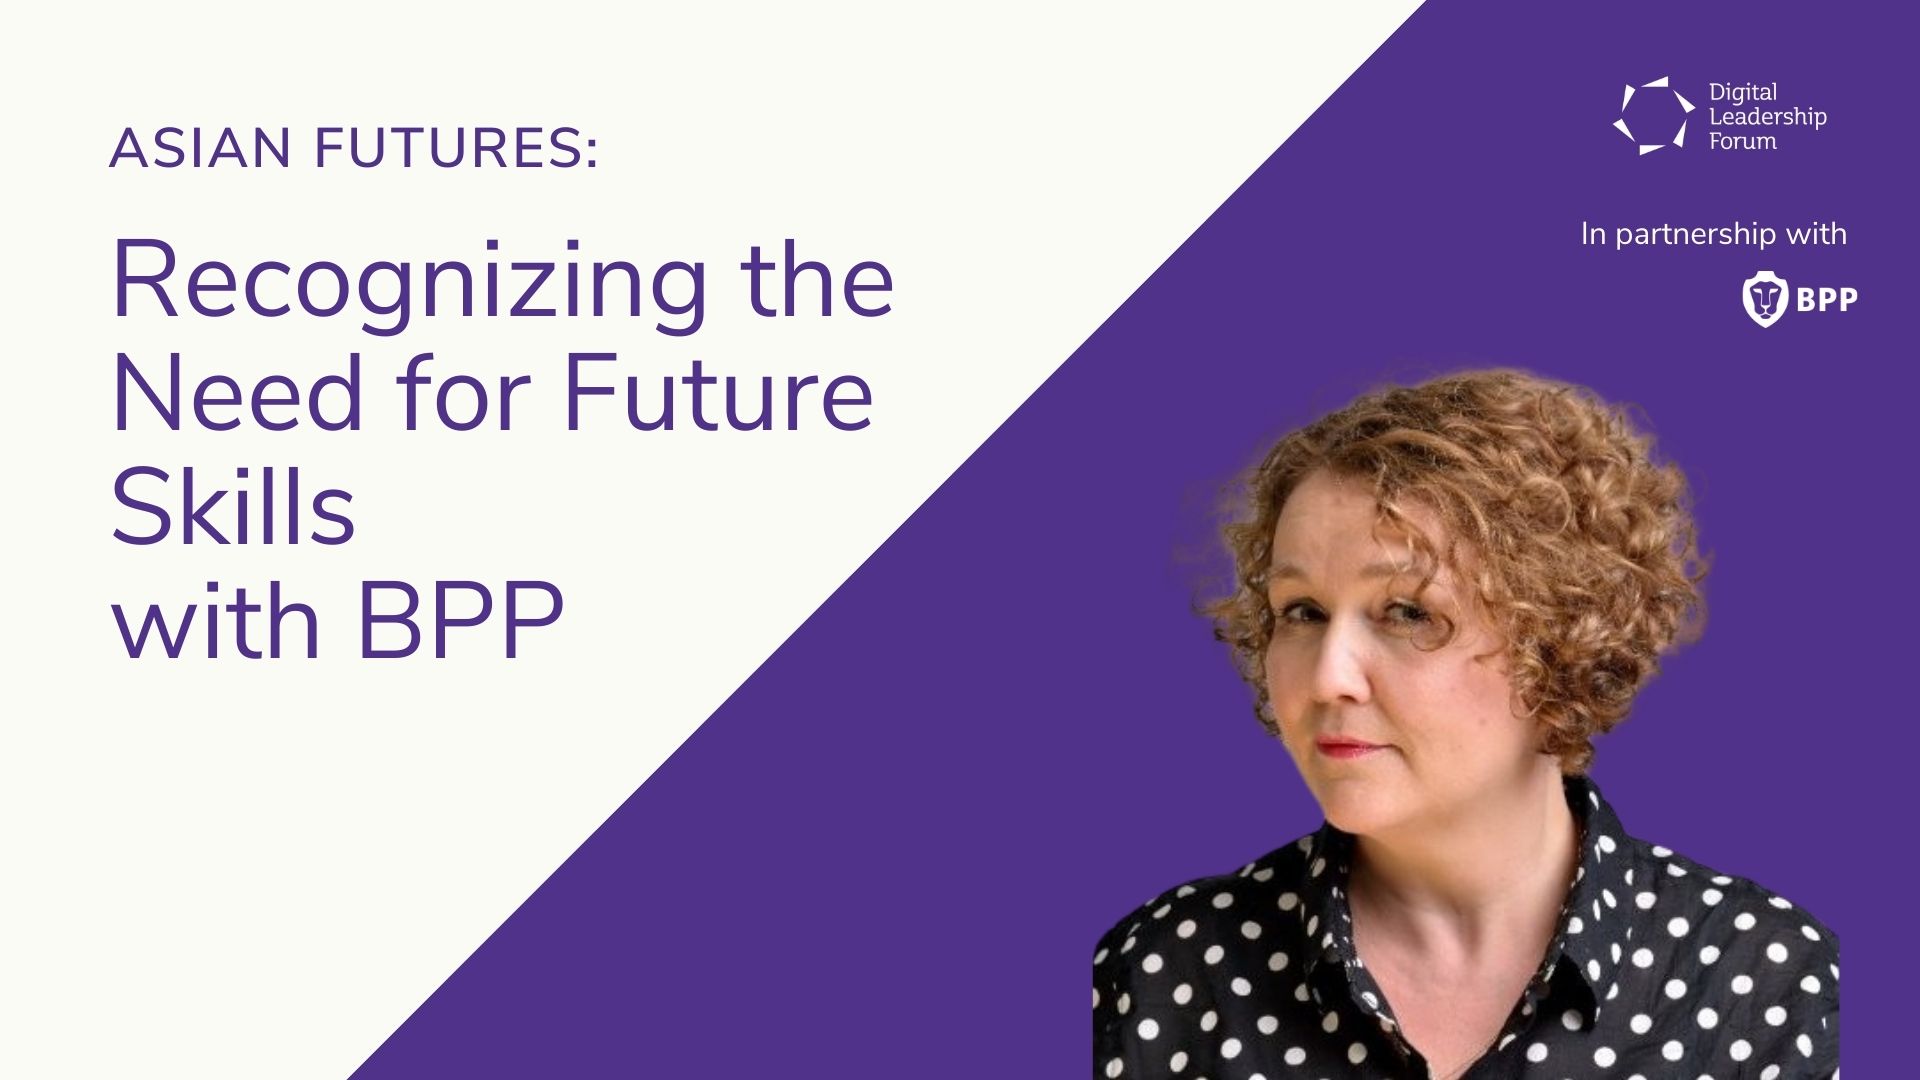 Video: Recognizing the Need for Future Skills with BPP